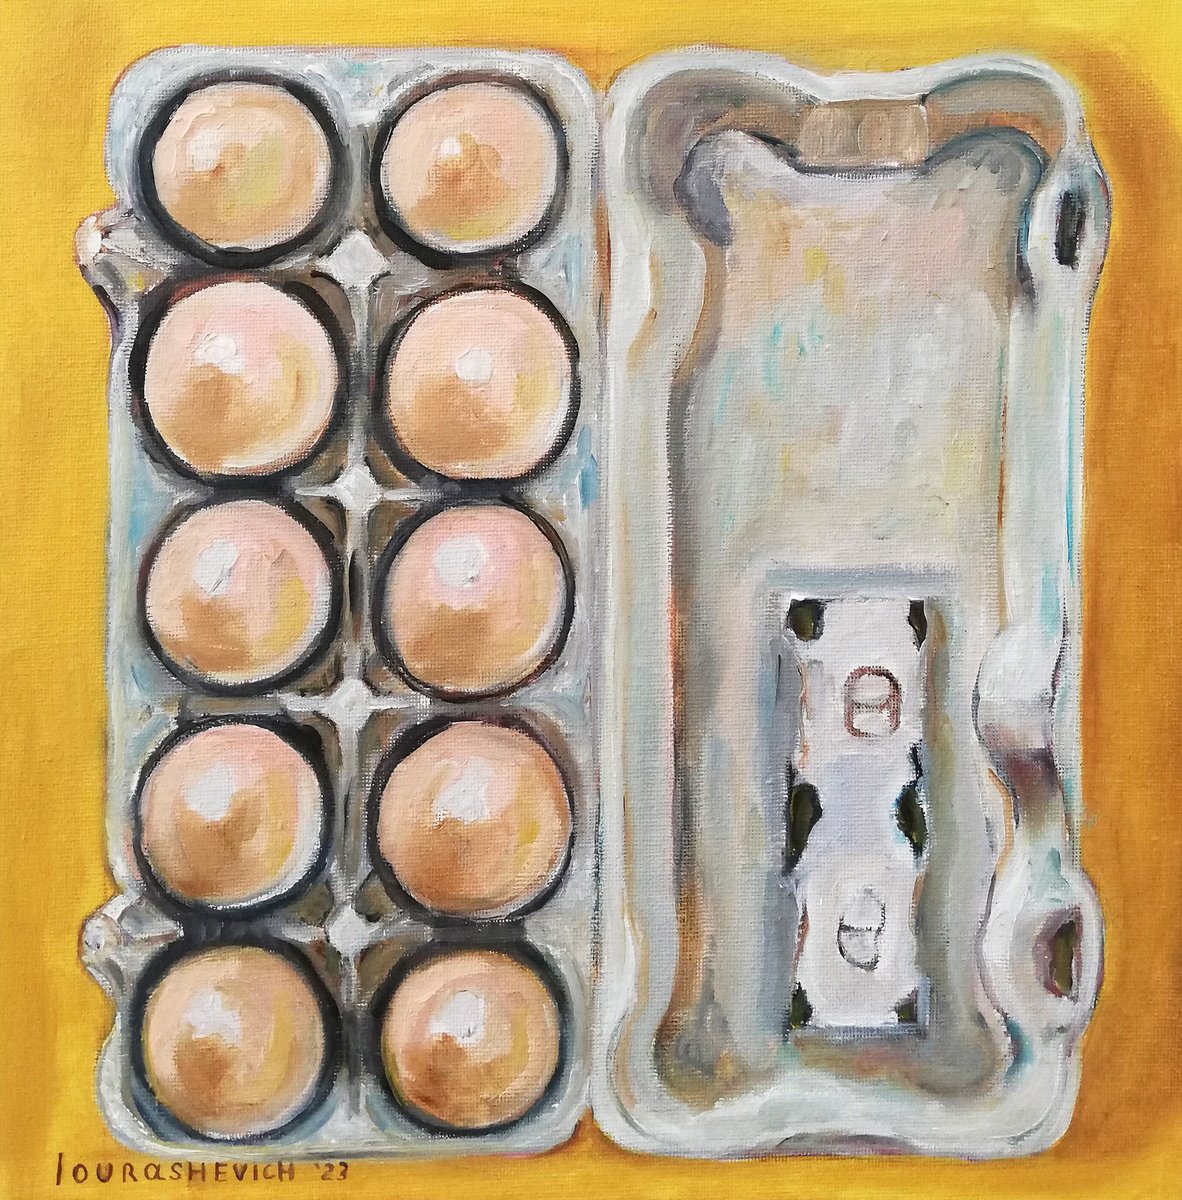 Eggs in a Carton Original Oil on Canvas Board Painting 12 by 12 inches (30x30 cm) by Katia Ricci